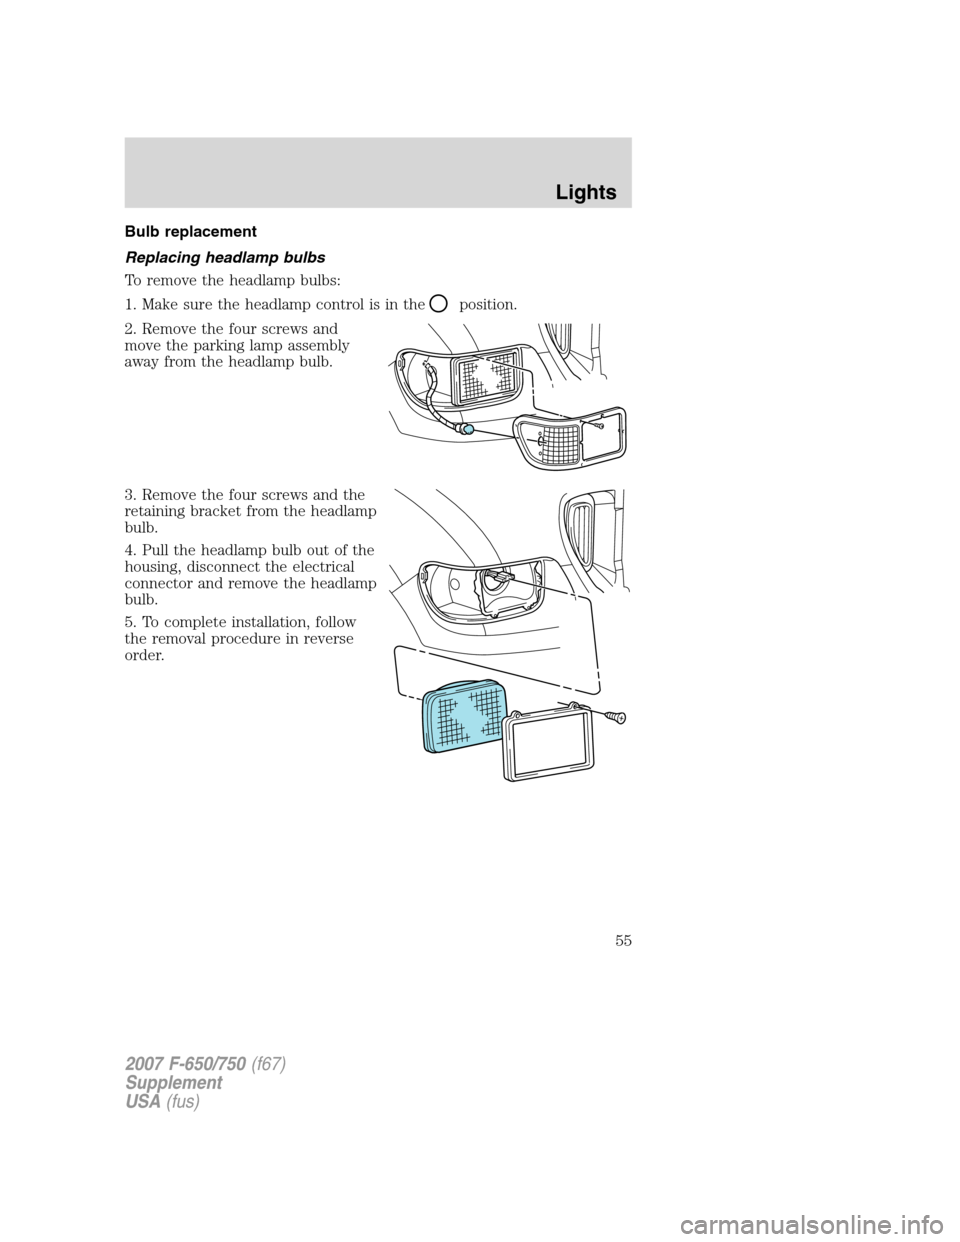 FORD F650 2007 11.G Owners Manual Bulb replacement
Replacing headlamp bulbs
To remove the headlamp bulbs:
1. Make sure the headlamp control is in the
position.
2. Remove the four screws and
move the parking lamp assembly
away from the